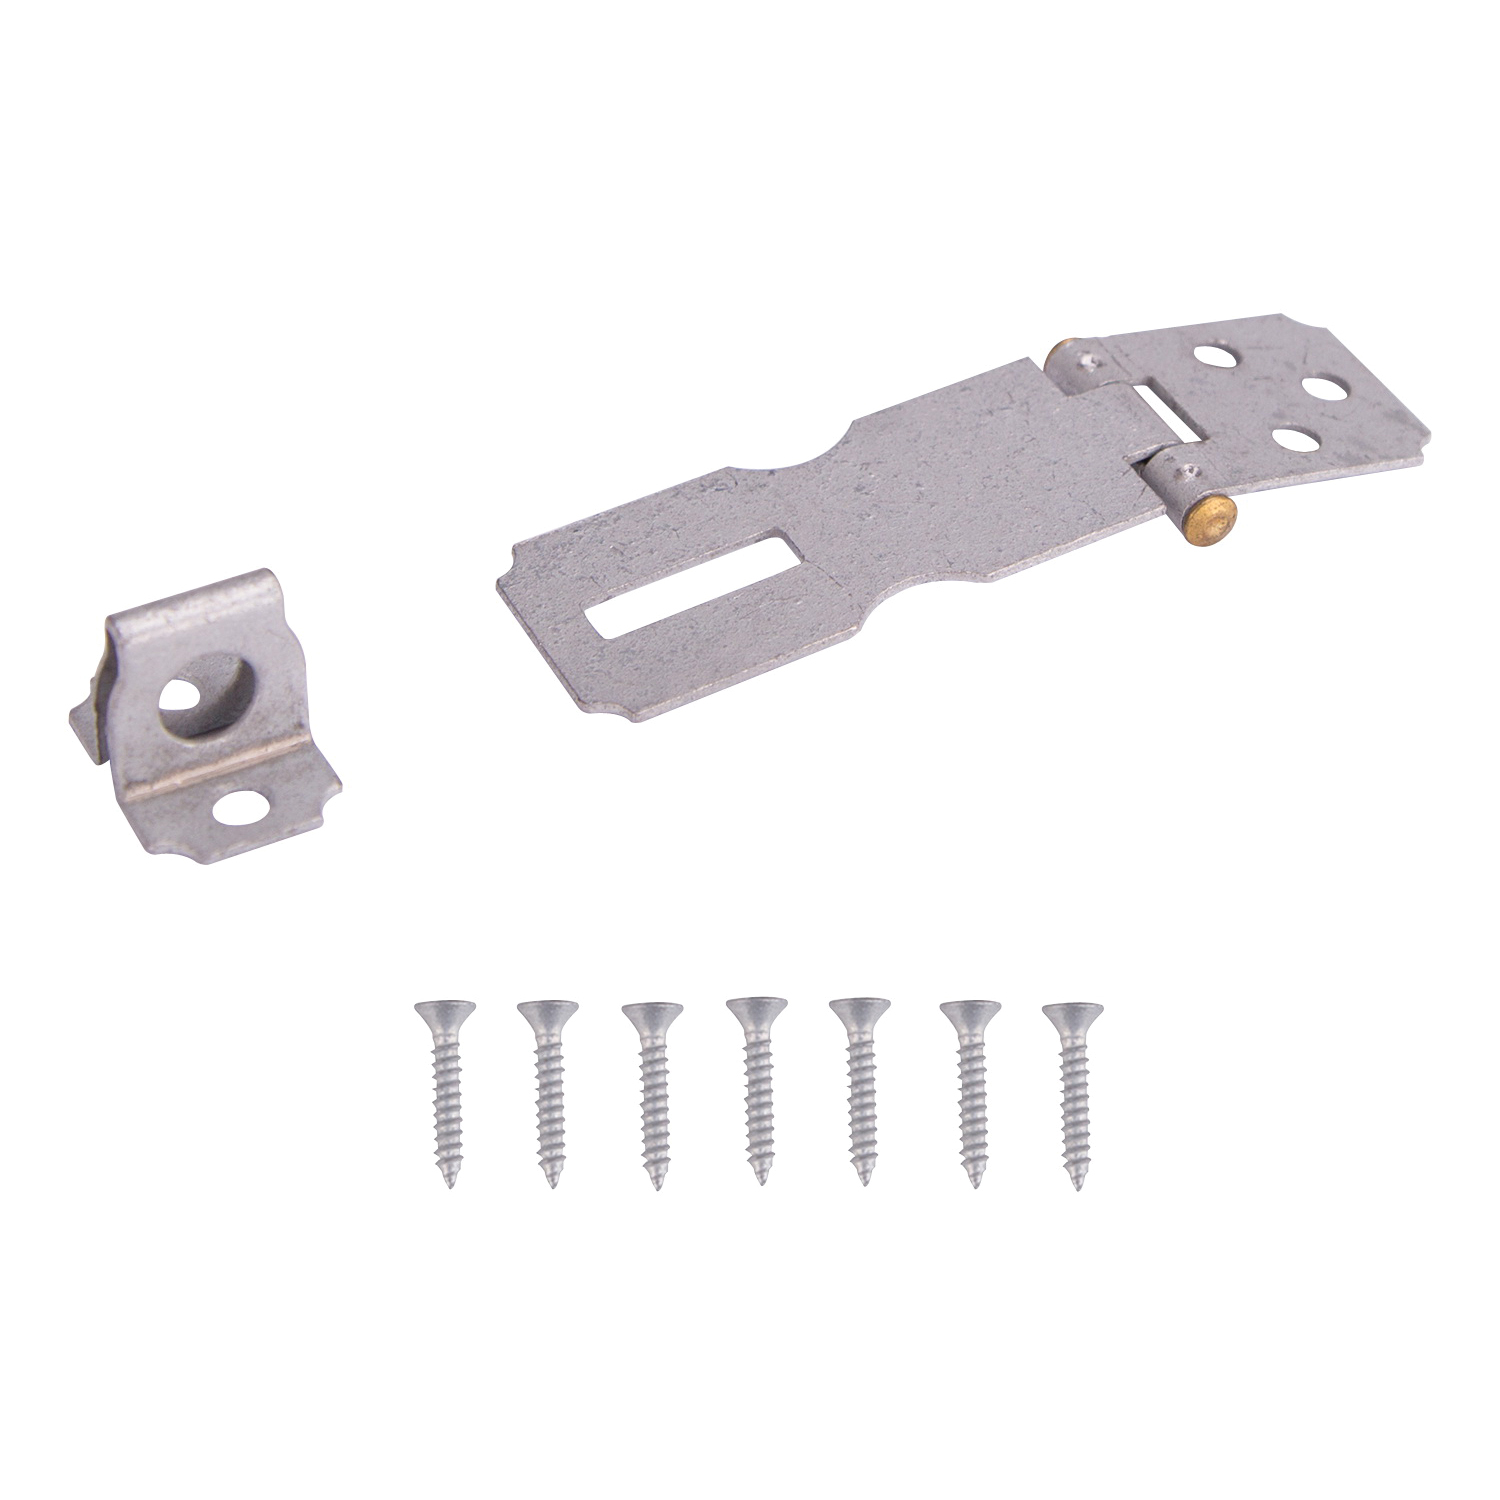 LR-130-BC3L-PS Safety Hasp, 2-1/2 in L, 2-1/2 in W, Steel, Galvanized, 9/32 Dia Shackle, Fixed Staple